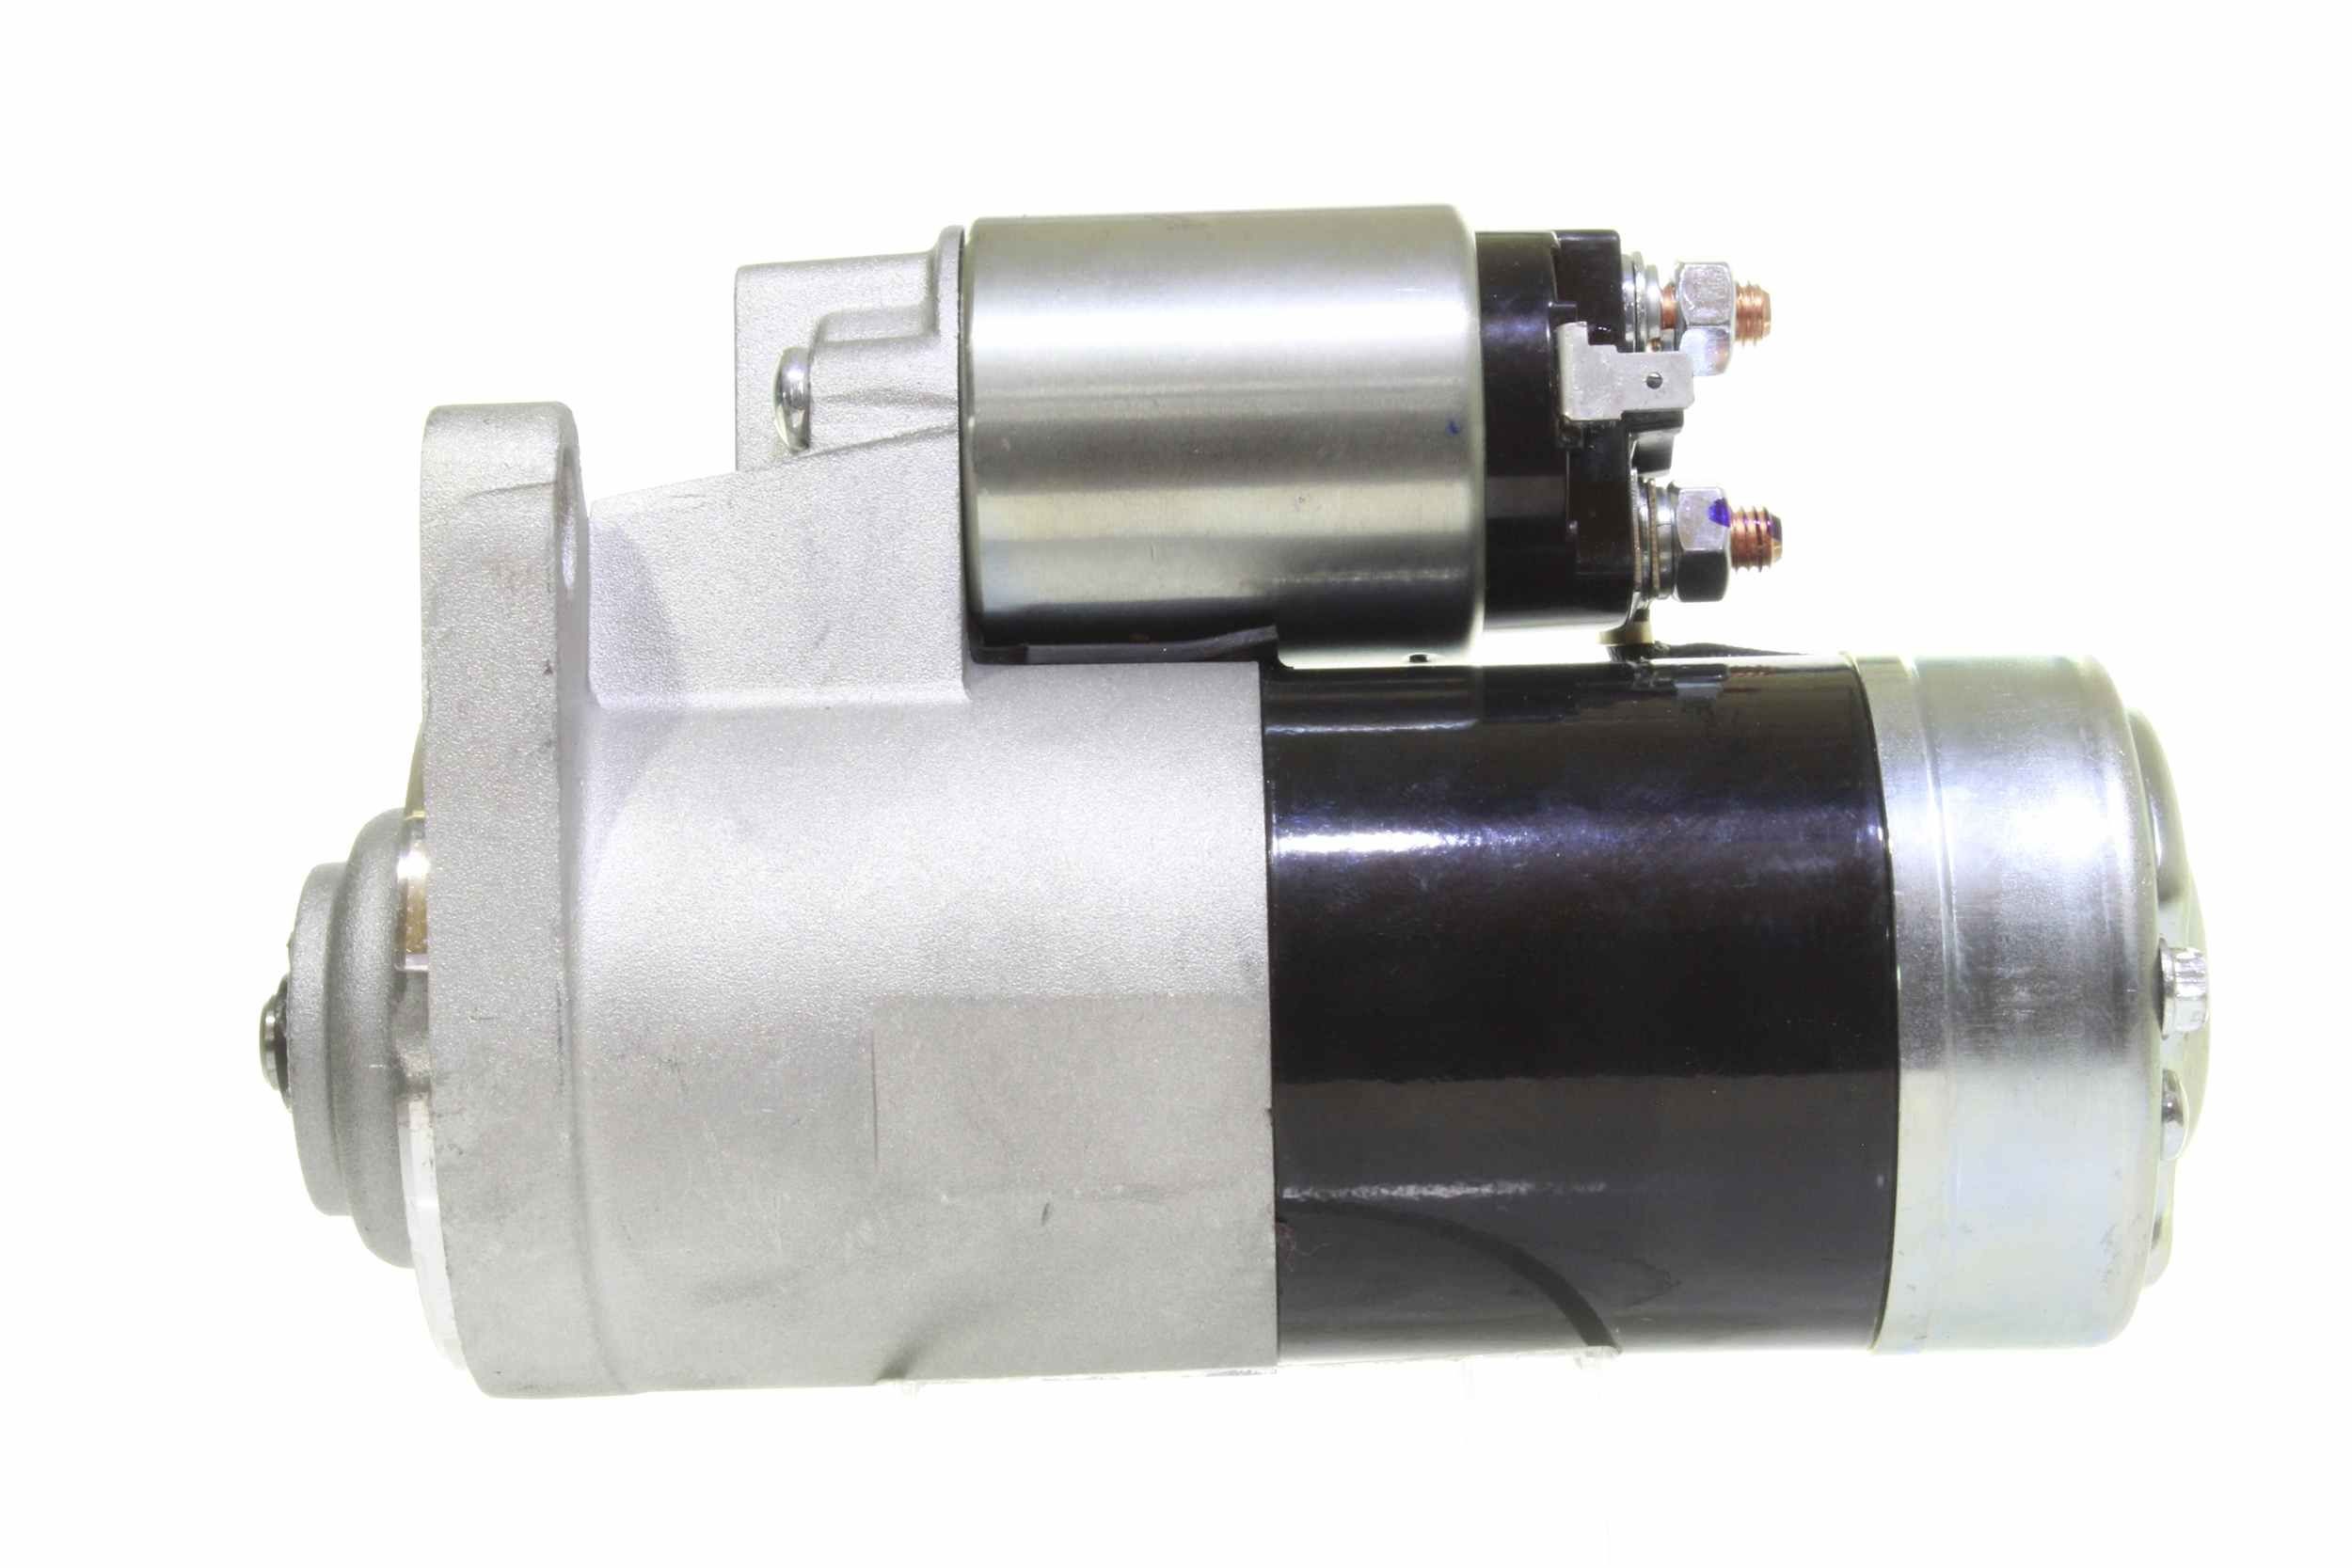 10440486 Engine starter motor ALANKO 17244 review and test